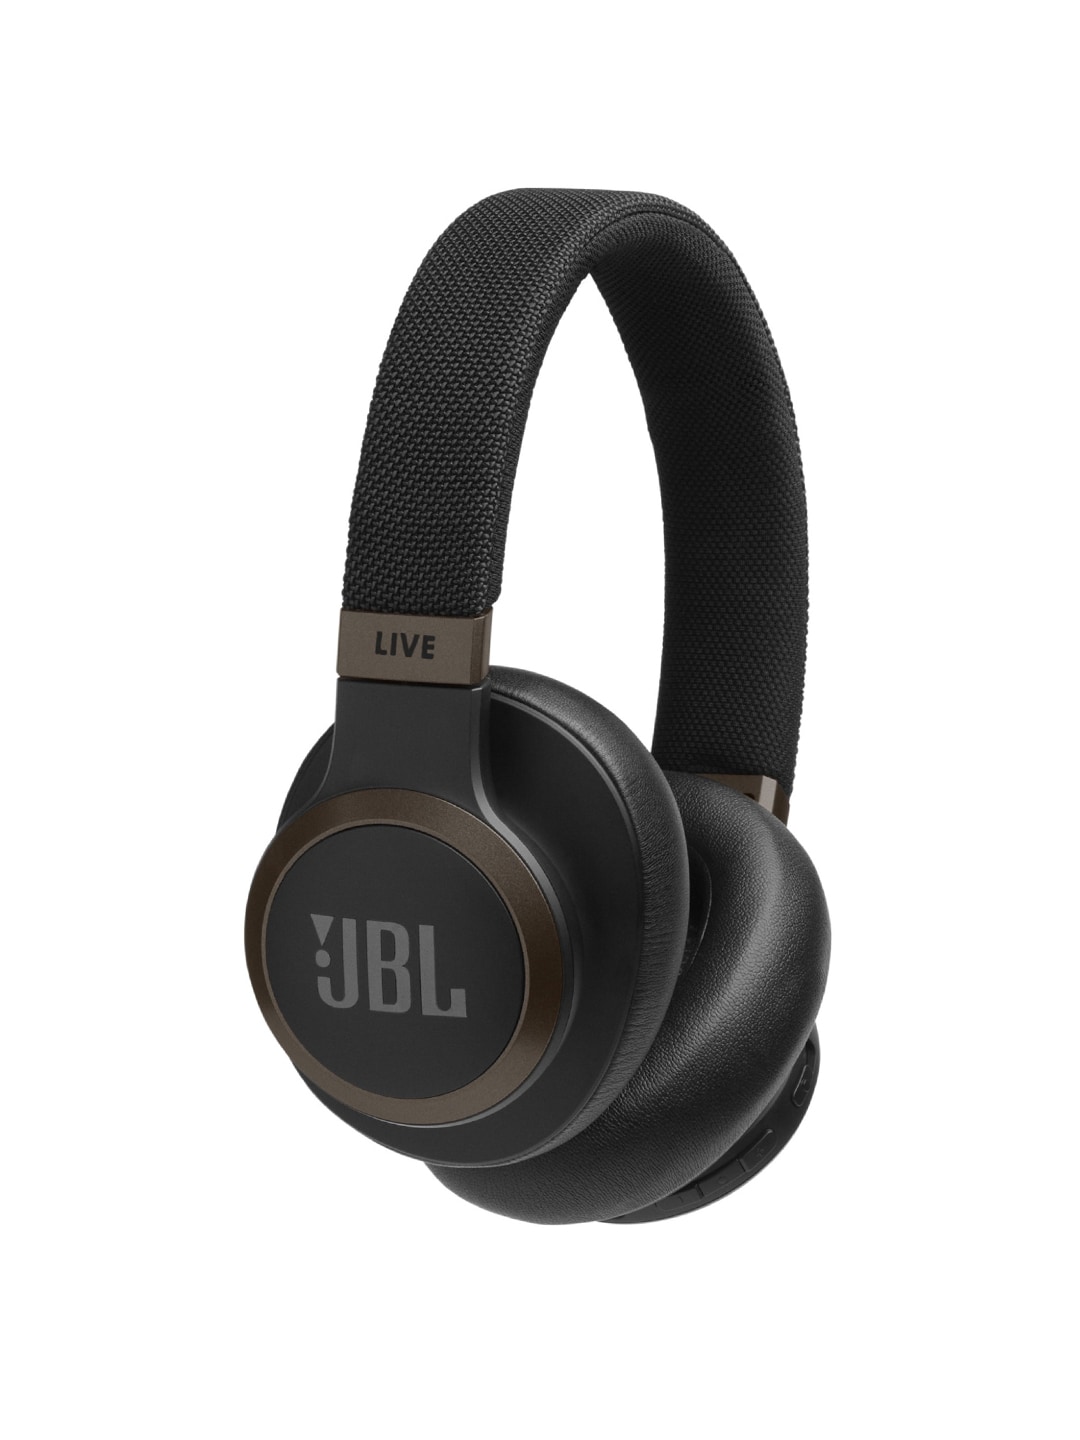 JBL Live 650BTNC M Black Wireless Over-Ear Noise-Cancelling Headphones Price in India